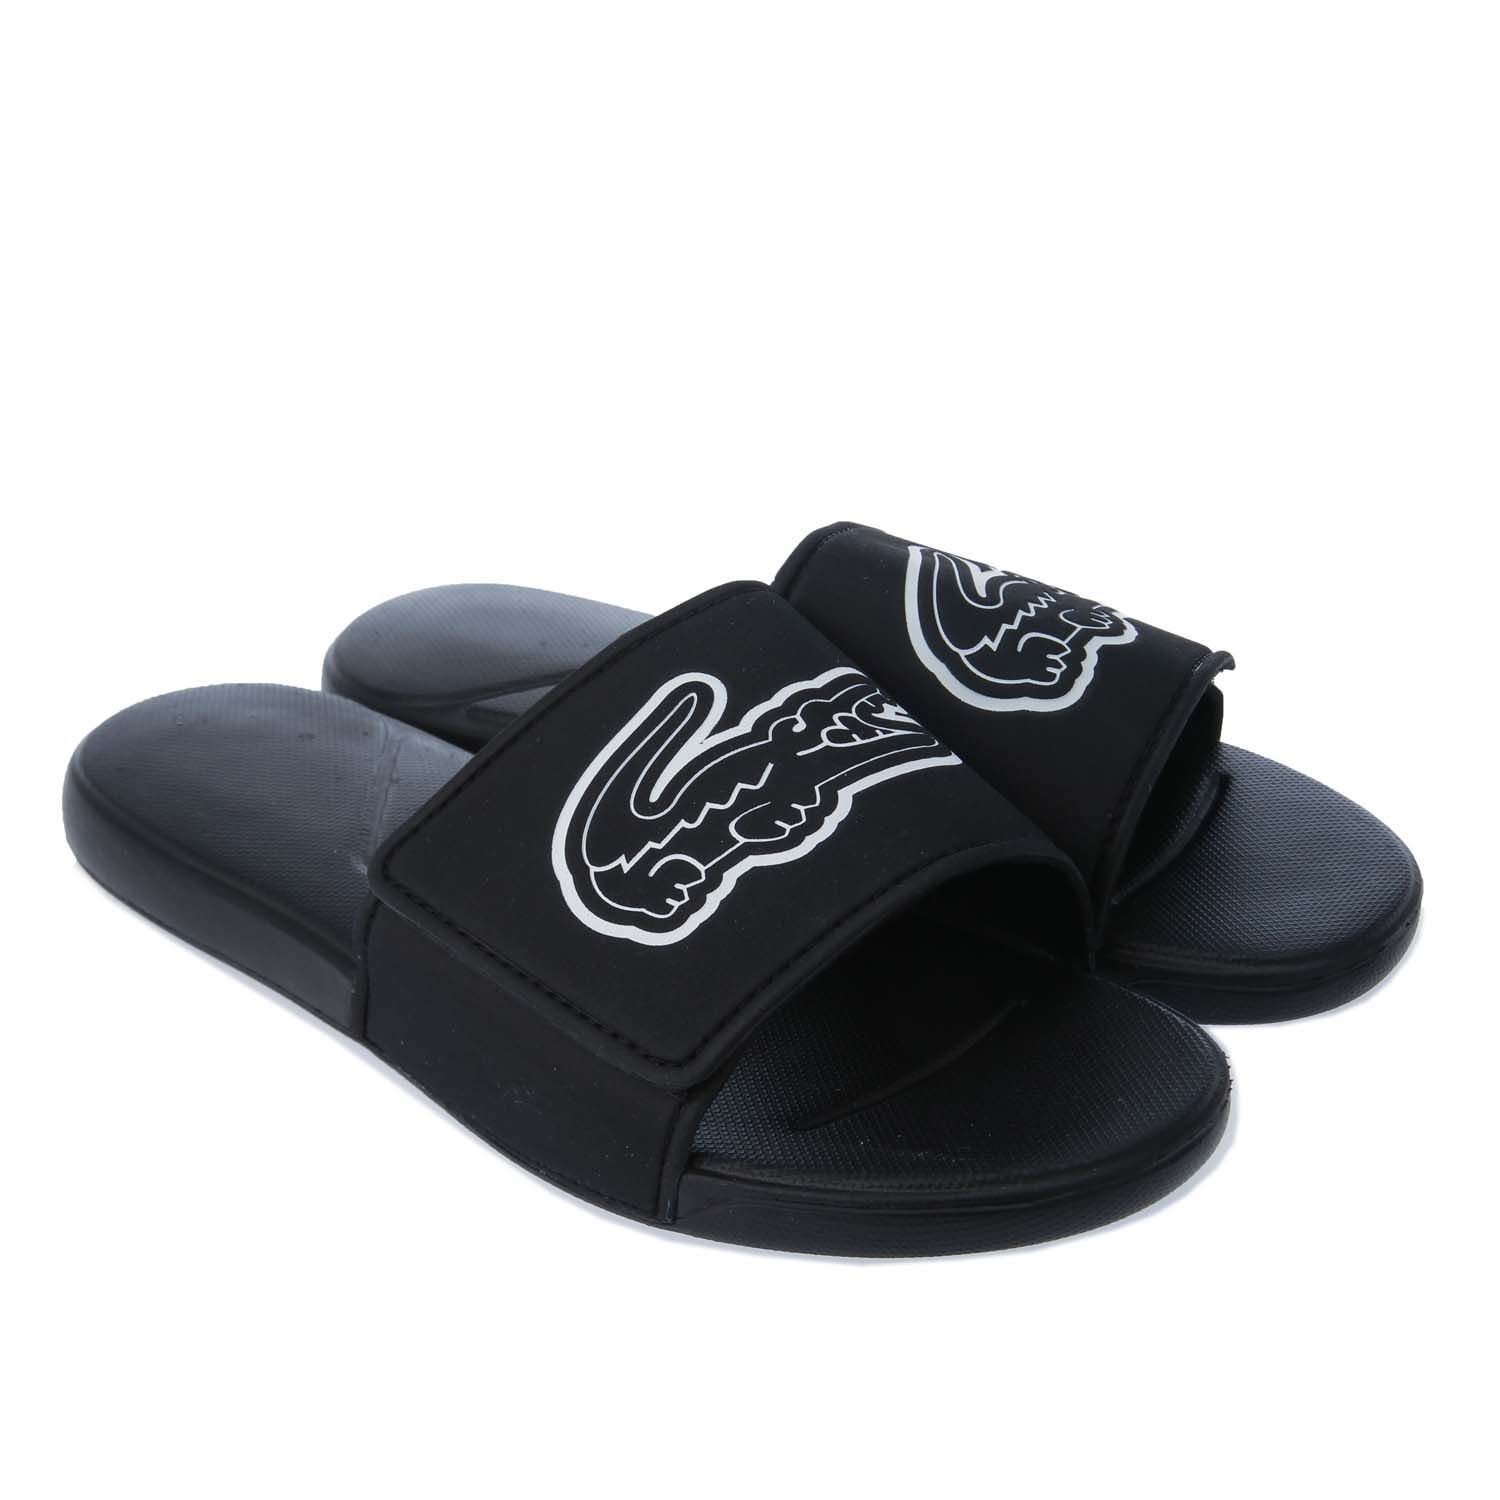 Junior Lacoste L.30 Strap Slide in black.- Synthetic uppers.- Slip on fastening.- Adjustable hook and loop strap ensures.- Oversized debossed crocodile branding on the strap.- Injection-Moulded Eva outsole.- Rubber sole.- Synthetic upper  Textile and synthetic lining  Synthetic sole.- Ref: 741CUJ0010312